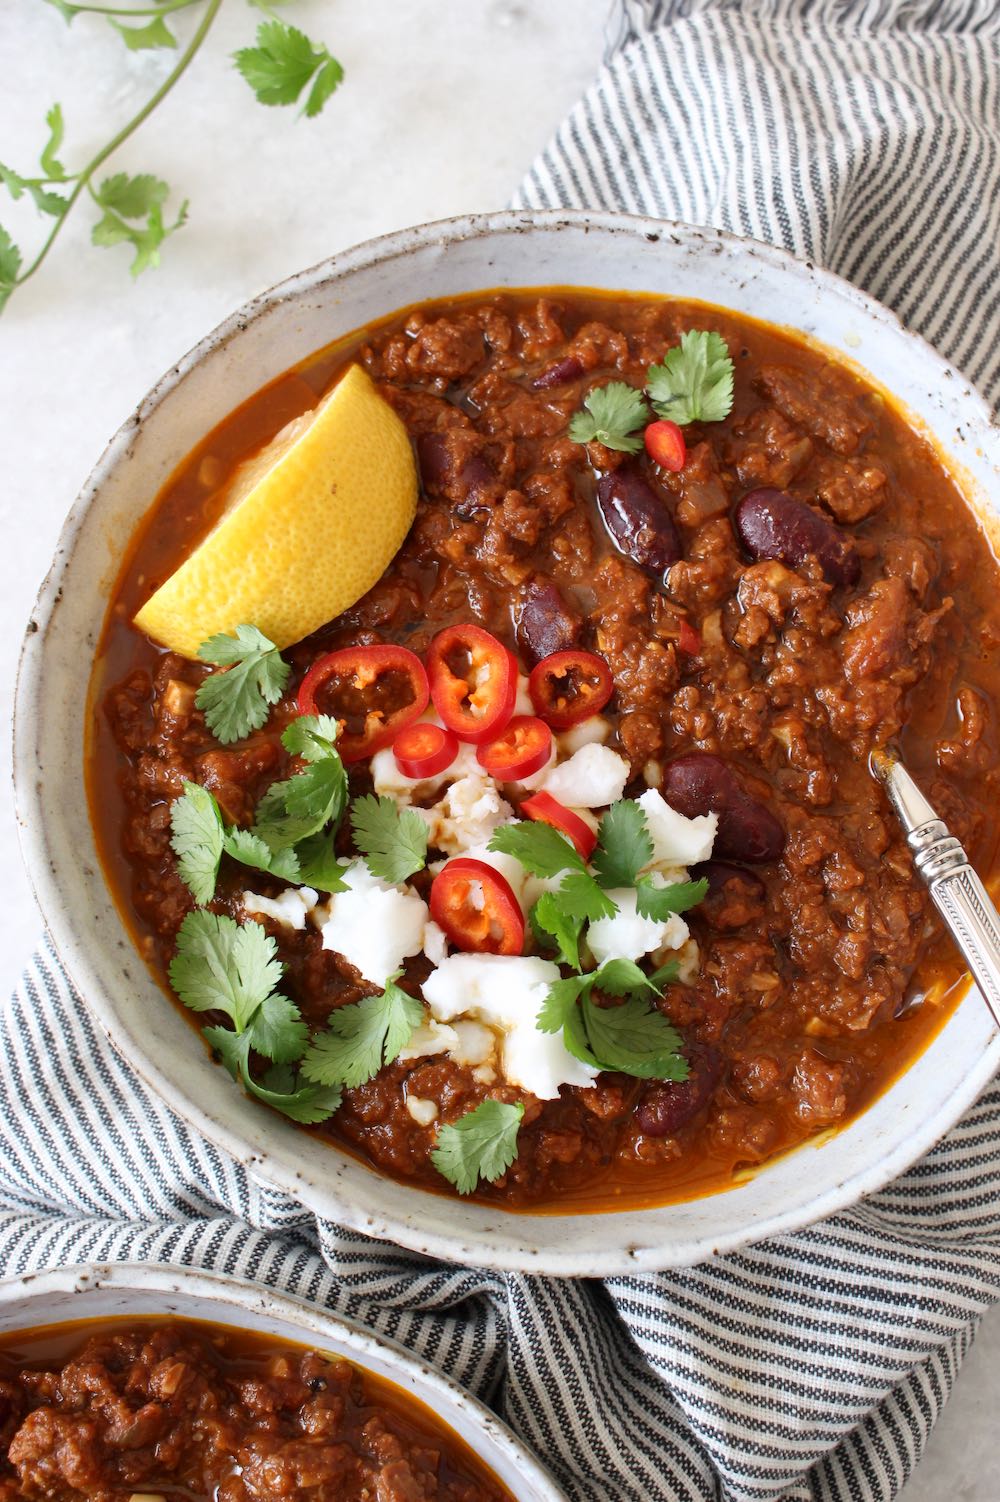 Vegan chili with soy curl and walnut meat.